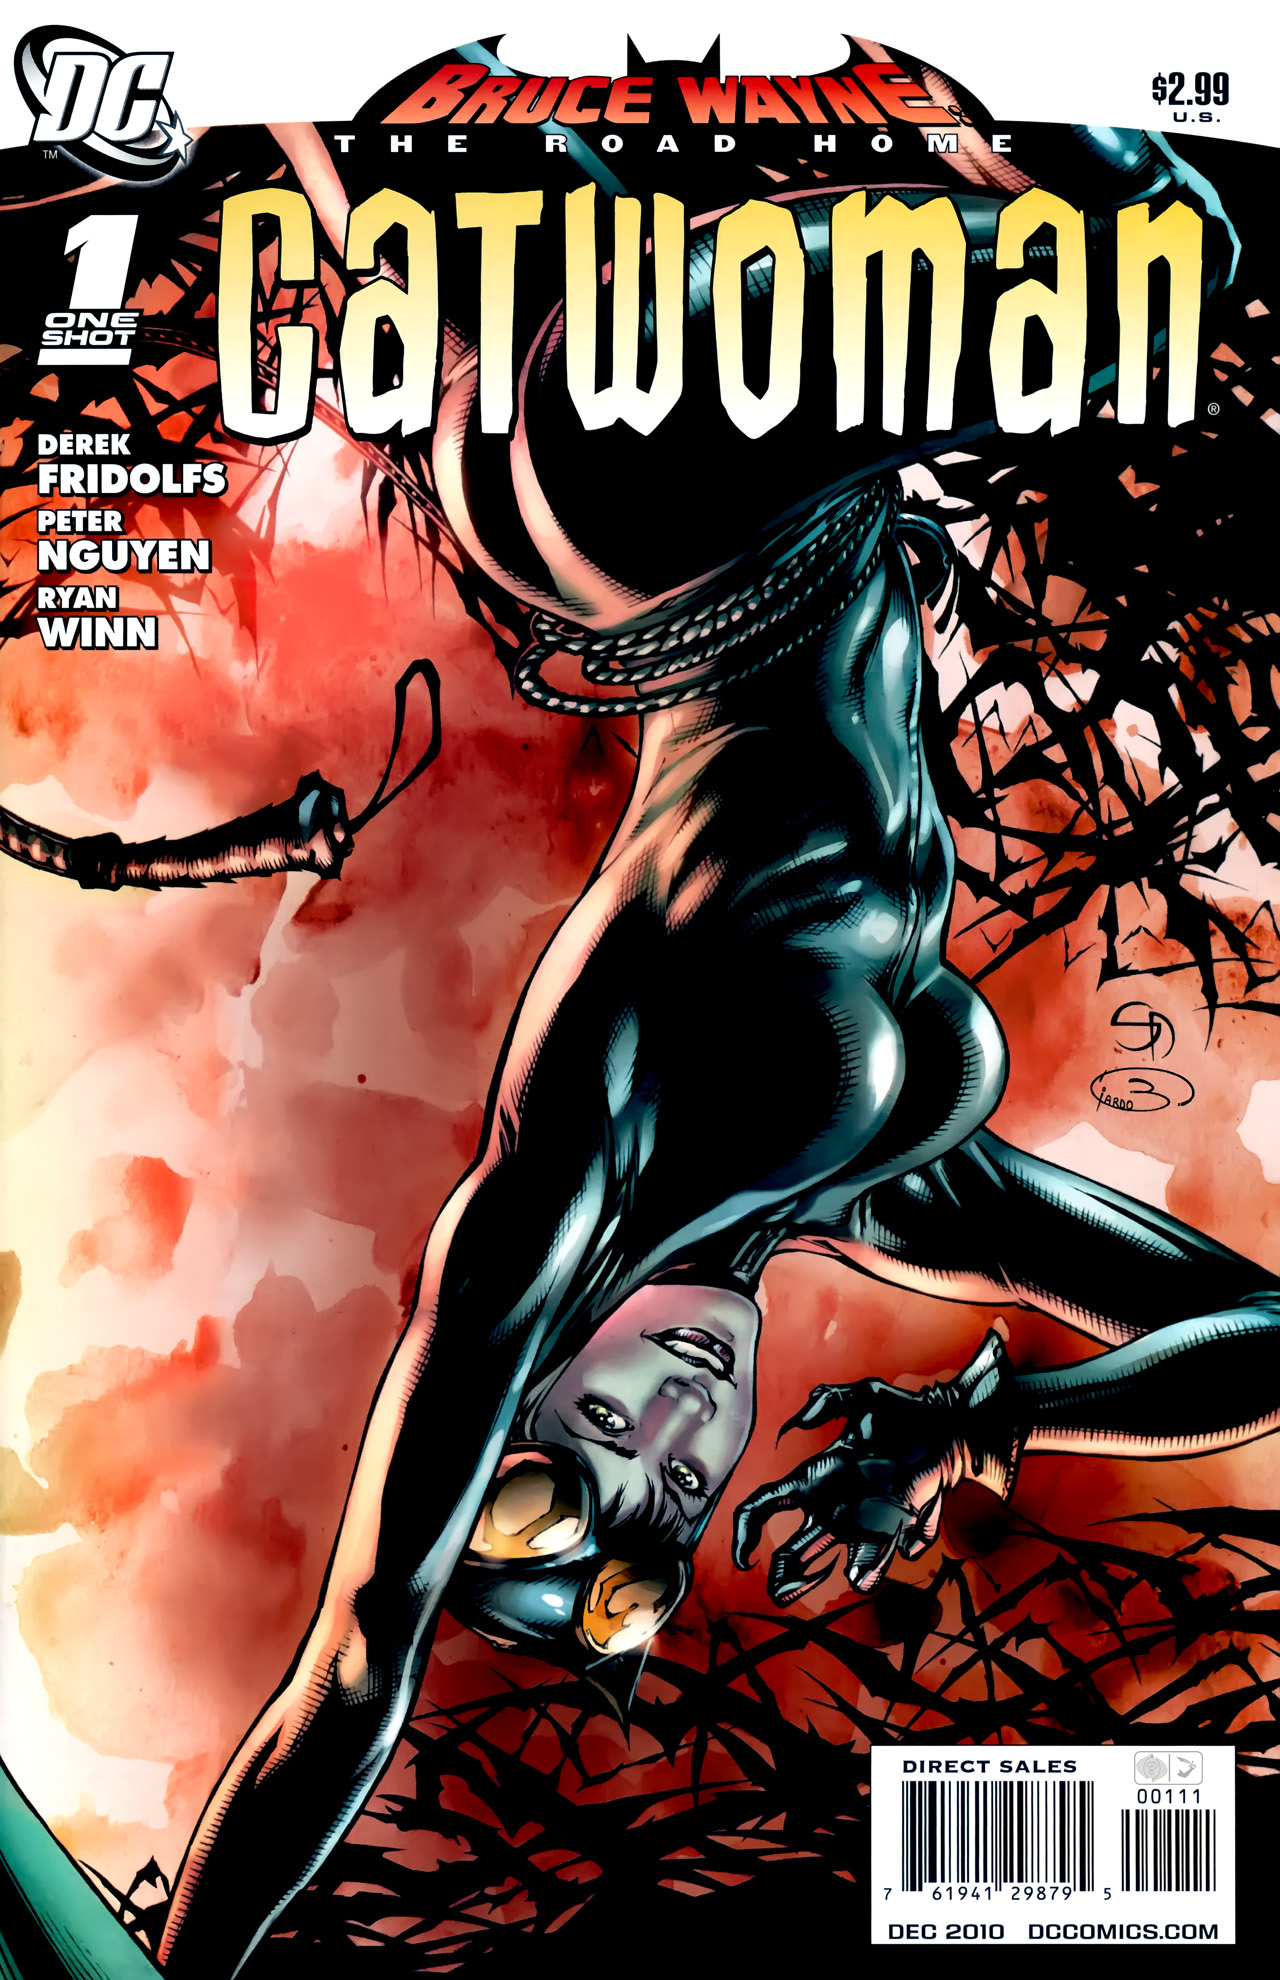 Read online Bruce Wayne: The Road Home comic -  Issue # Issue Catwoman - 1